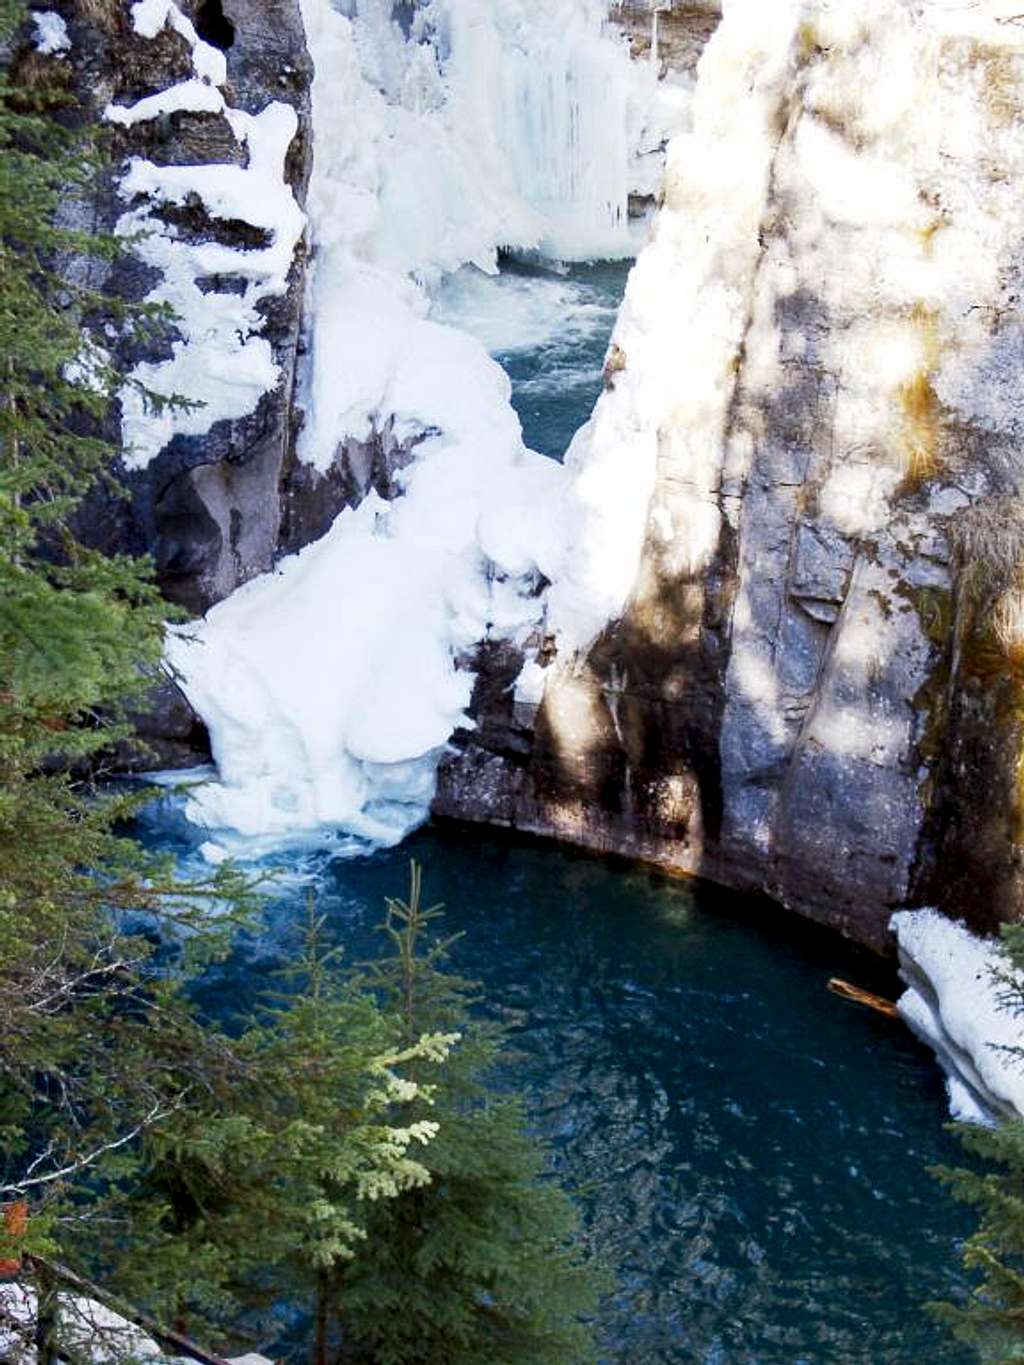 Lower Falls from the trail, Johnston Canyon